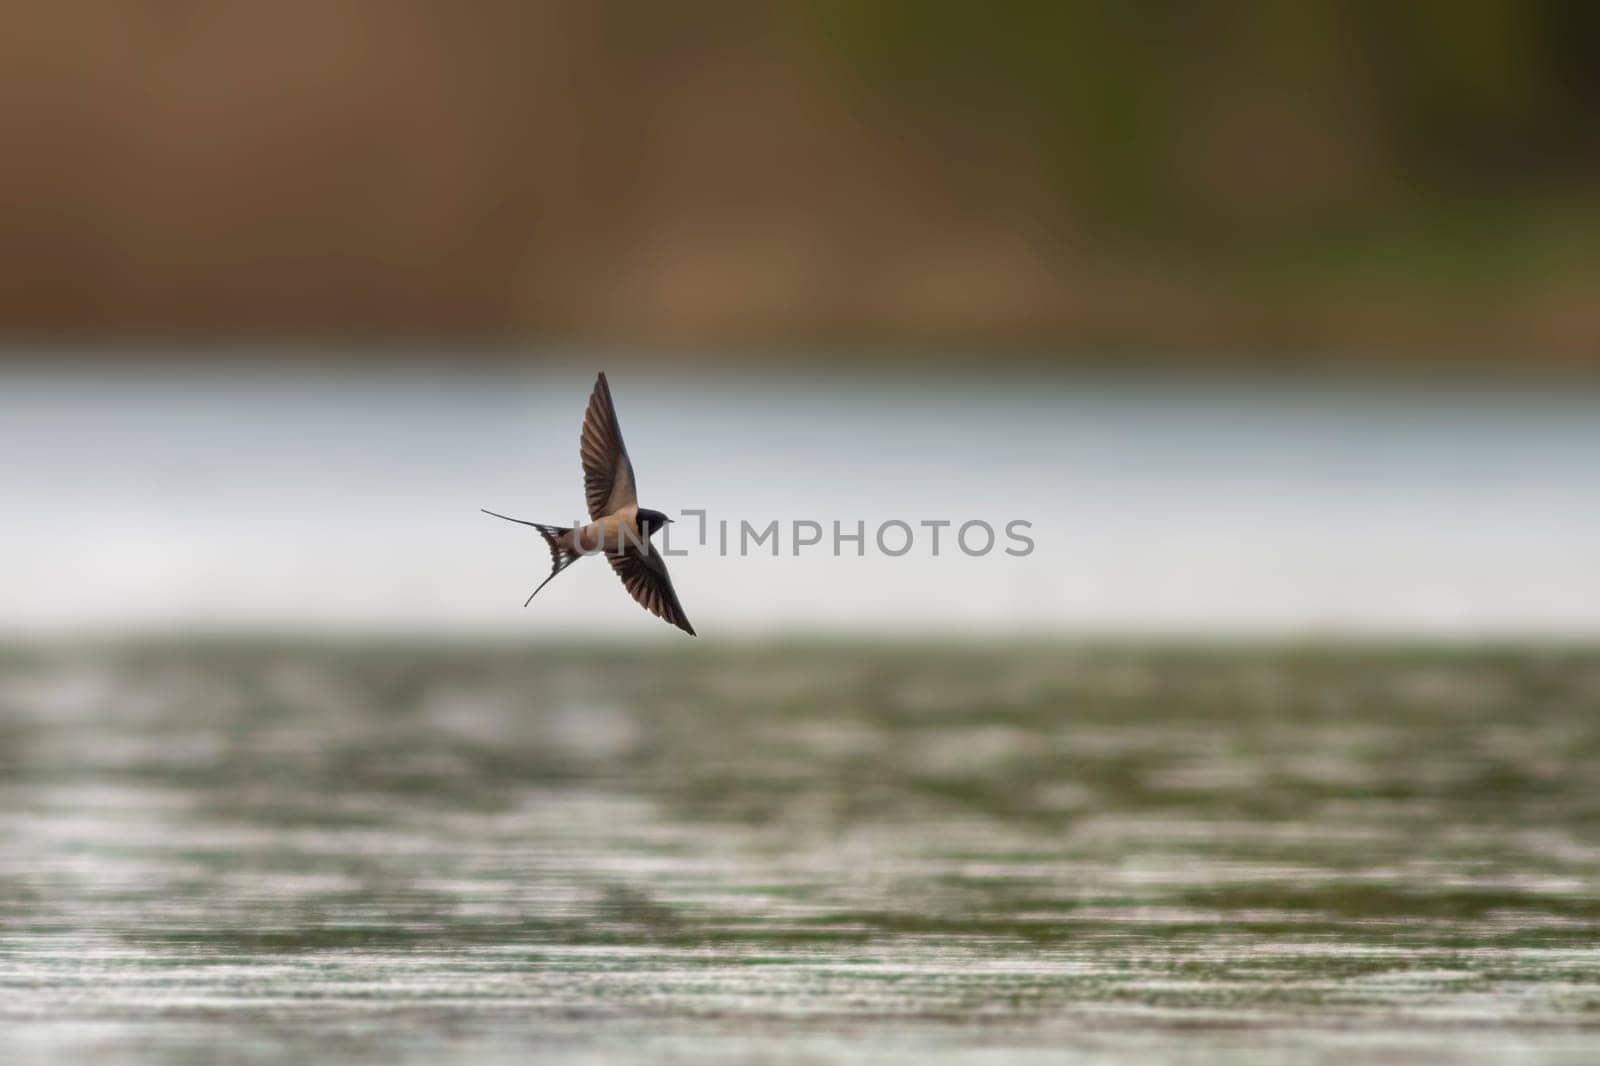 a barn swallow (Hirundo rustica) flies over a lake in search of insects